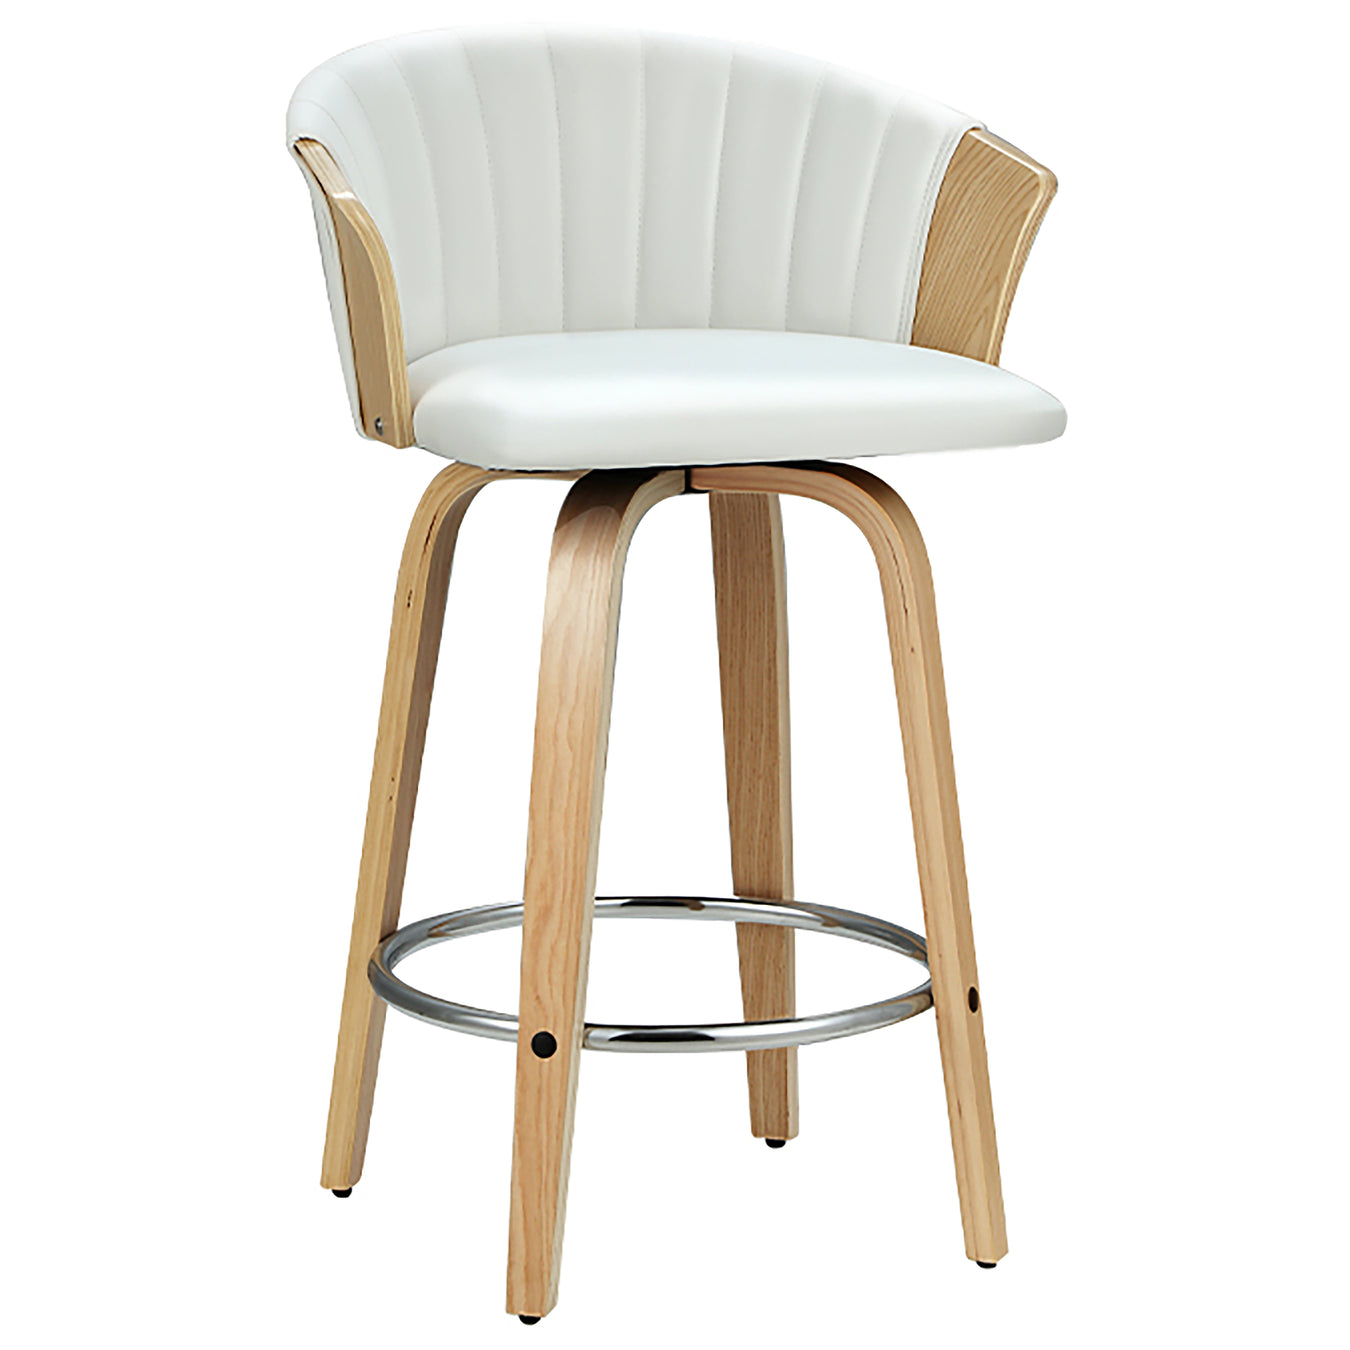 Bar Stools with Foot Rests